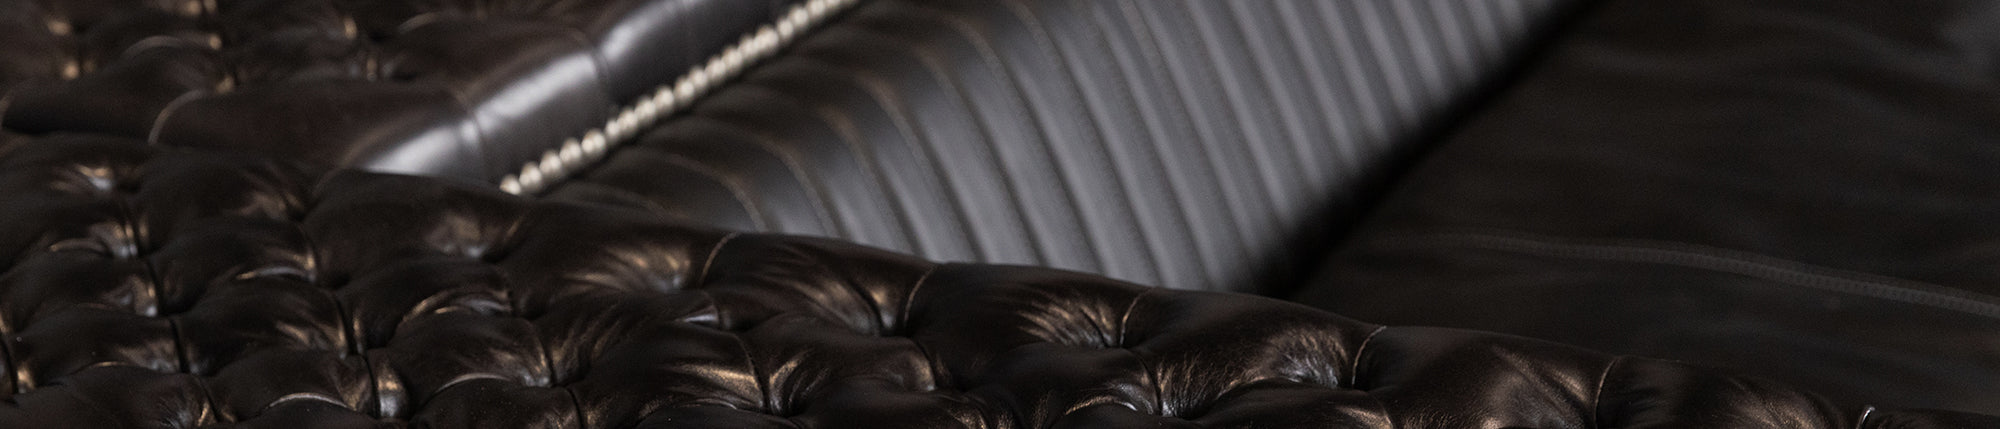 leather sectional sofa header